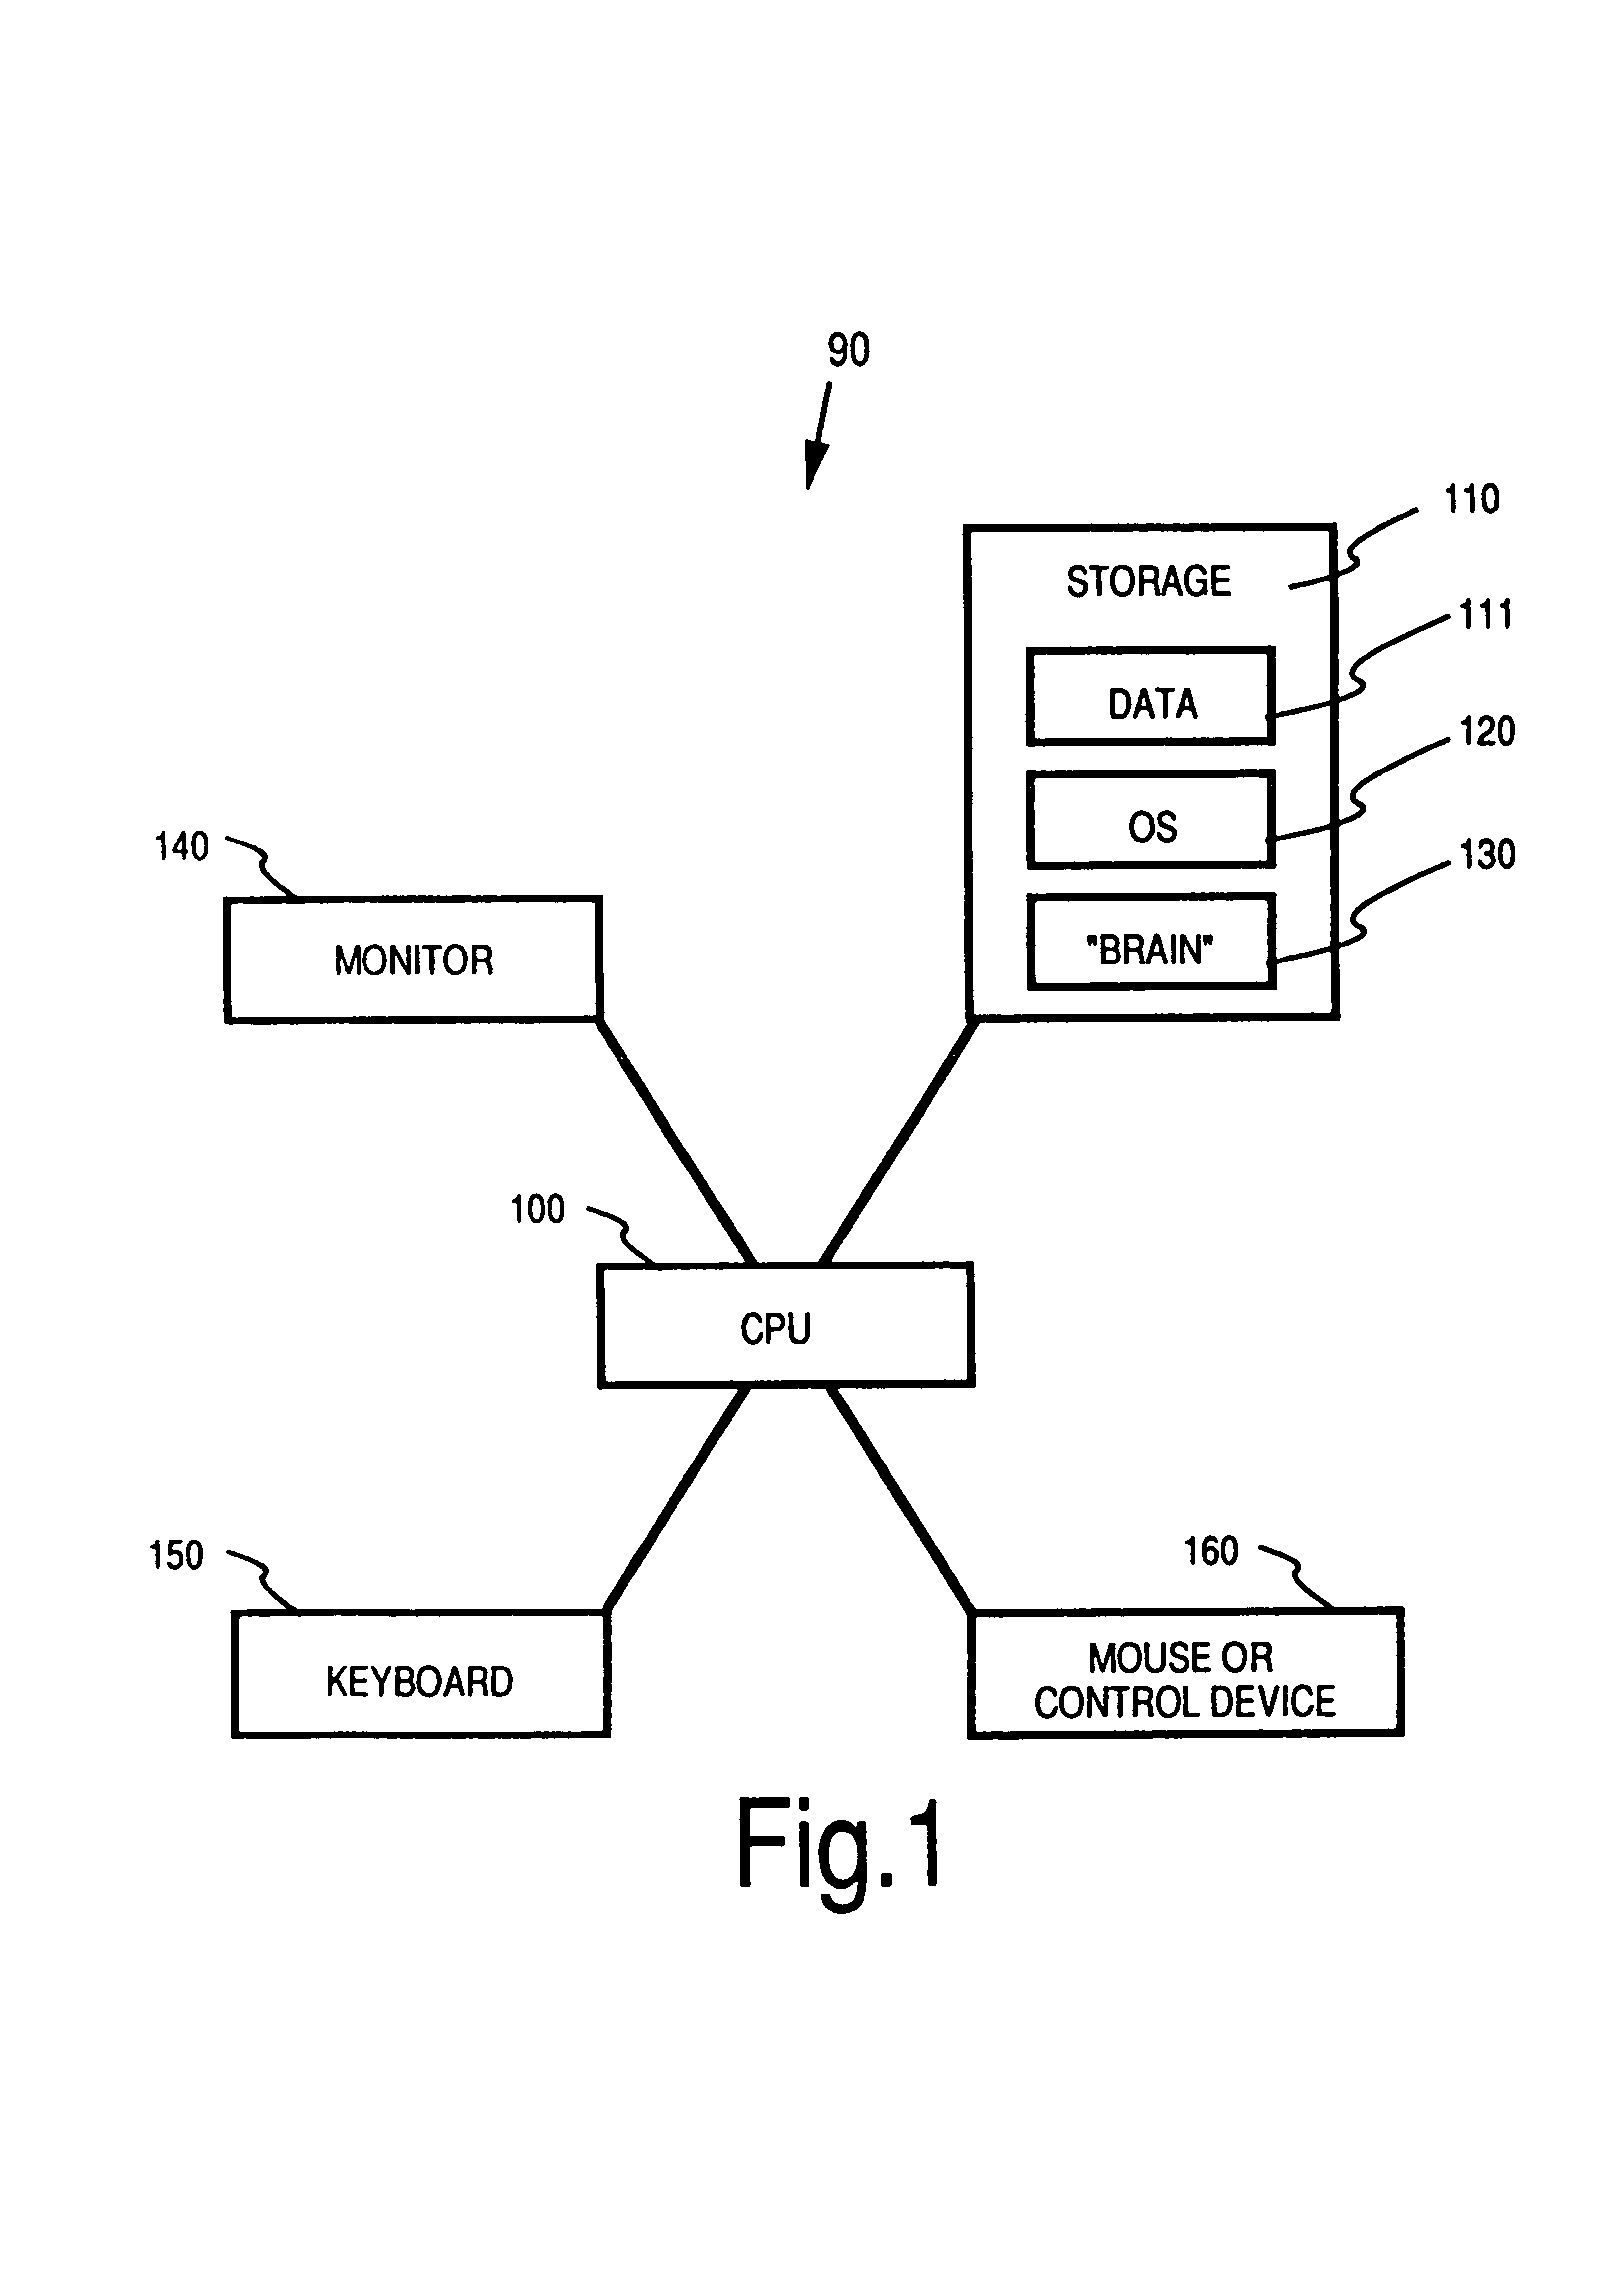 Method and apparatus for organizing and processing information using a digital computer